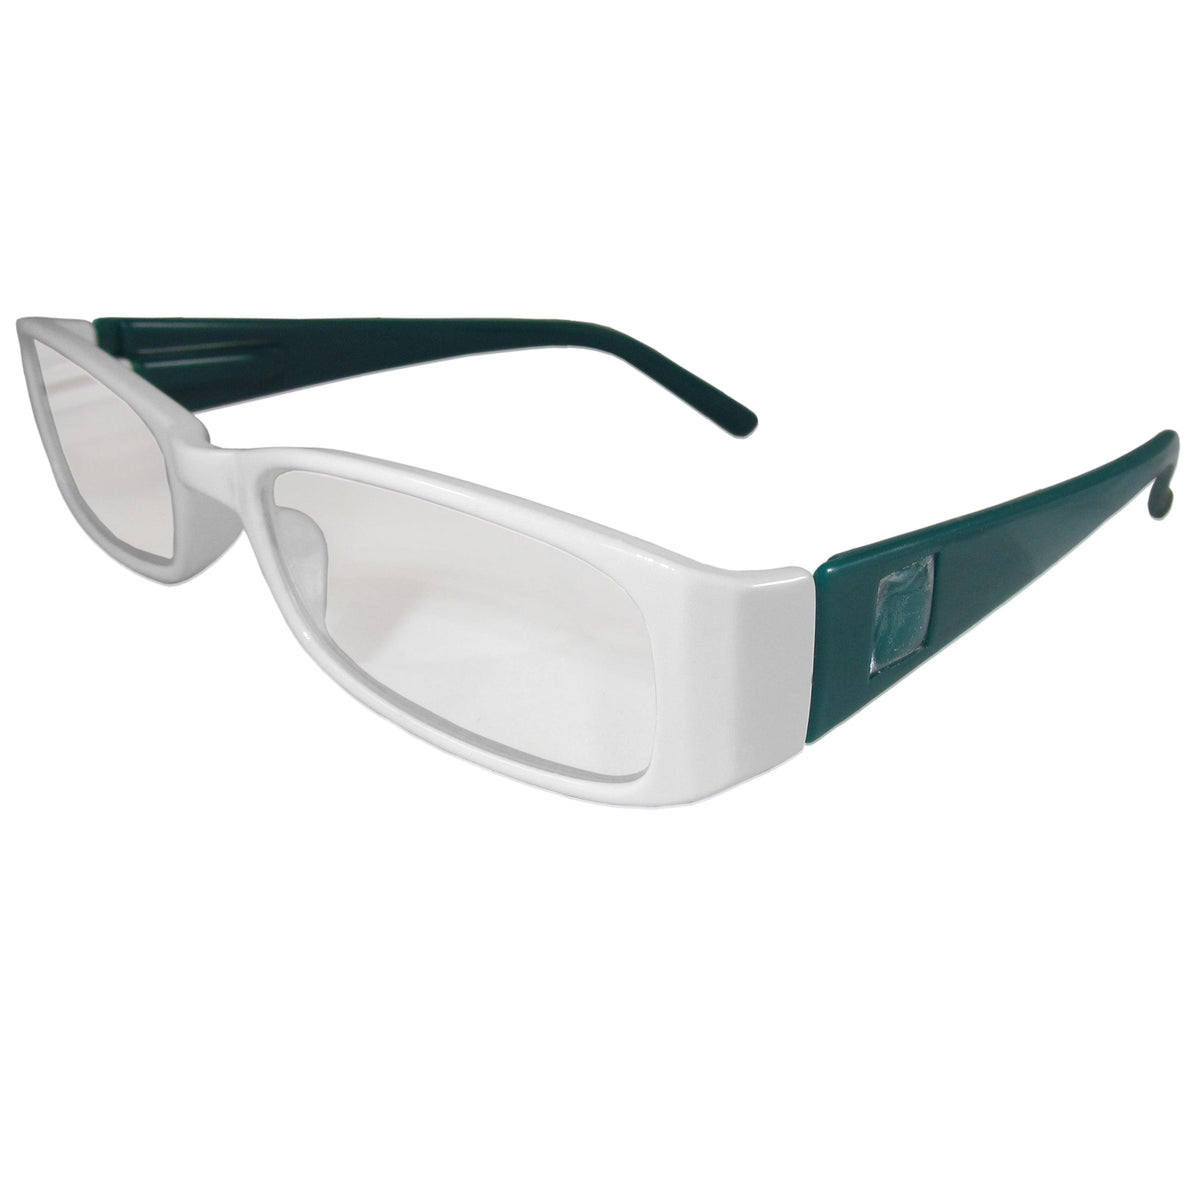 White and Teal Reading Glasses Power +2.00, 3 pack - Flyclothing LLC